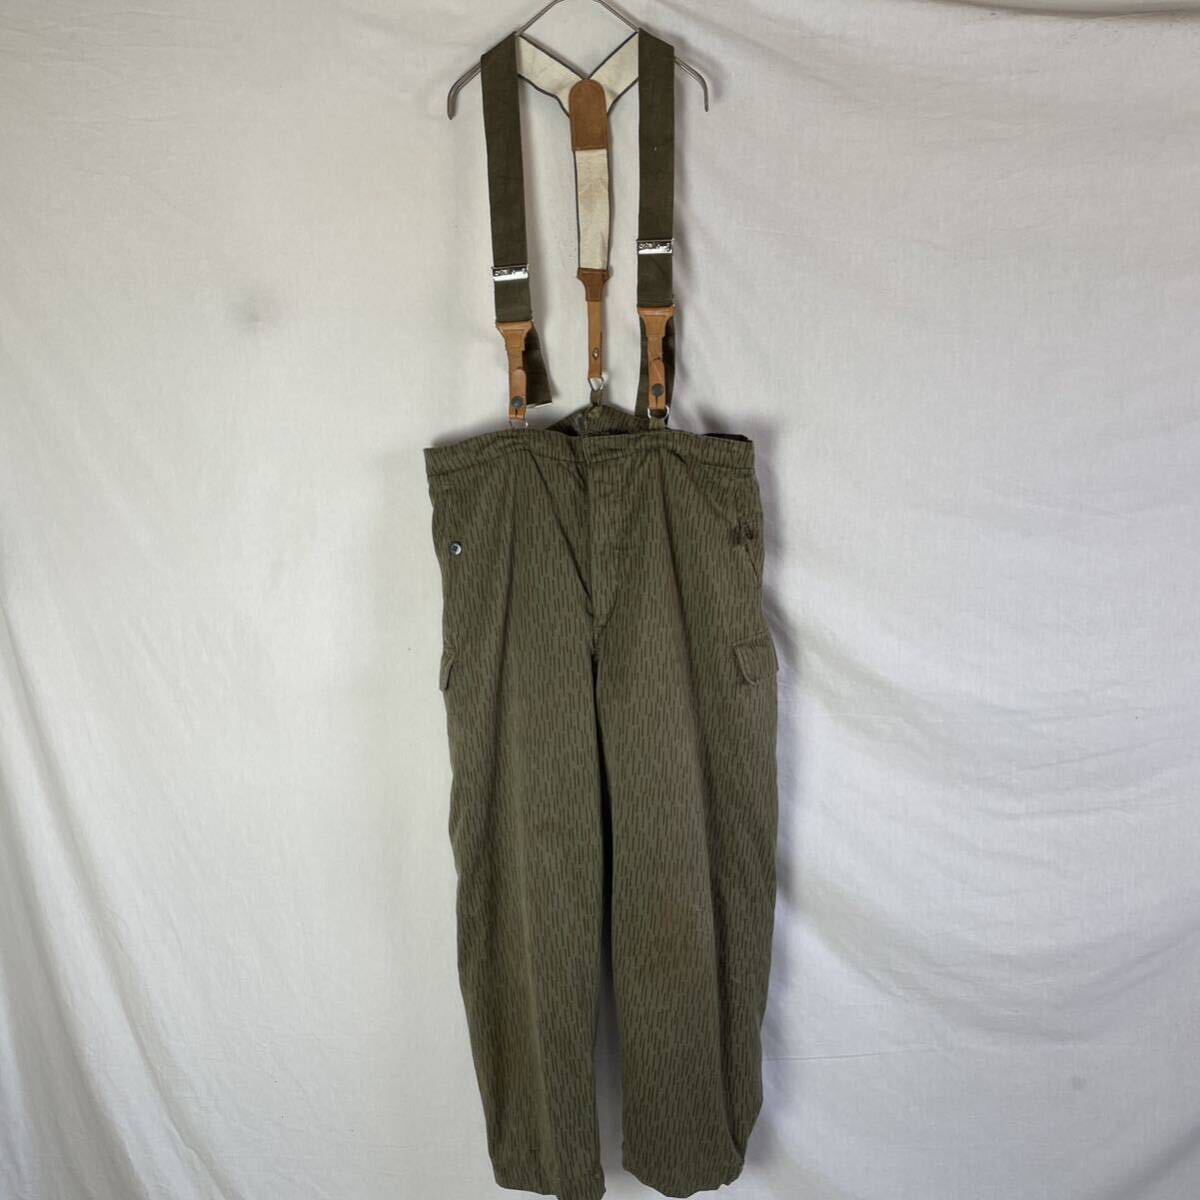  East Germany army rain Drop duck pants with cotton military camouflage old clothes suspenders attaching 